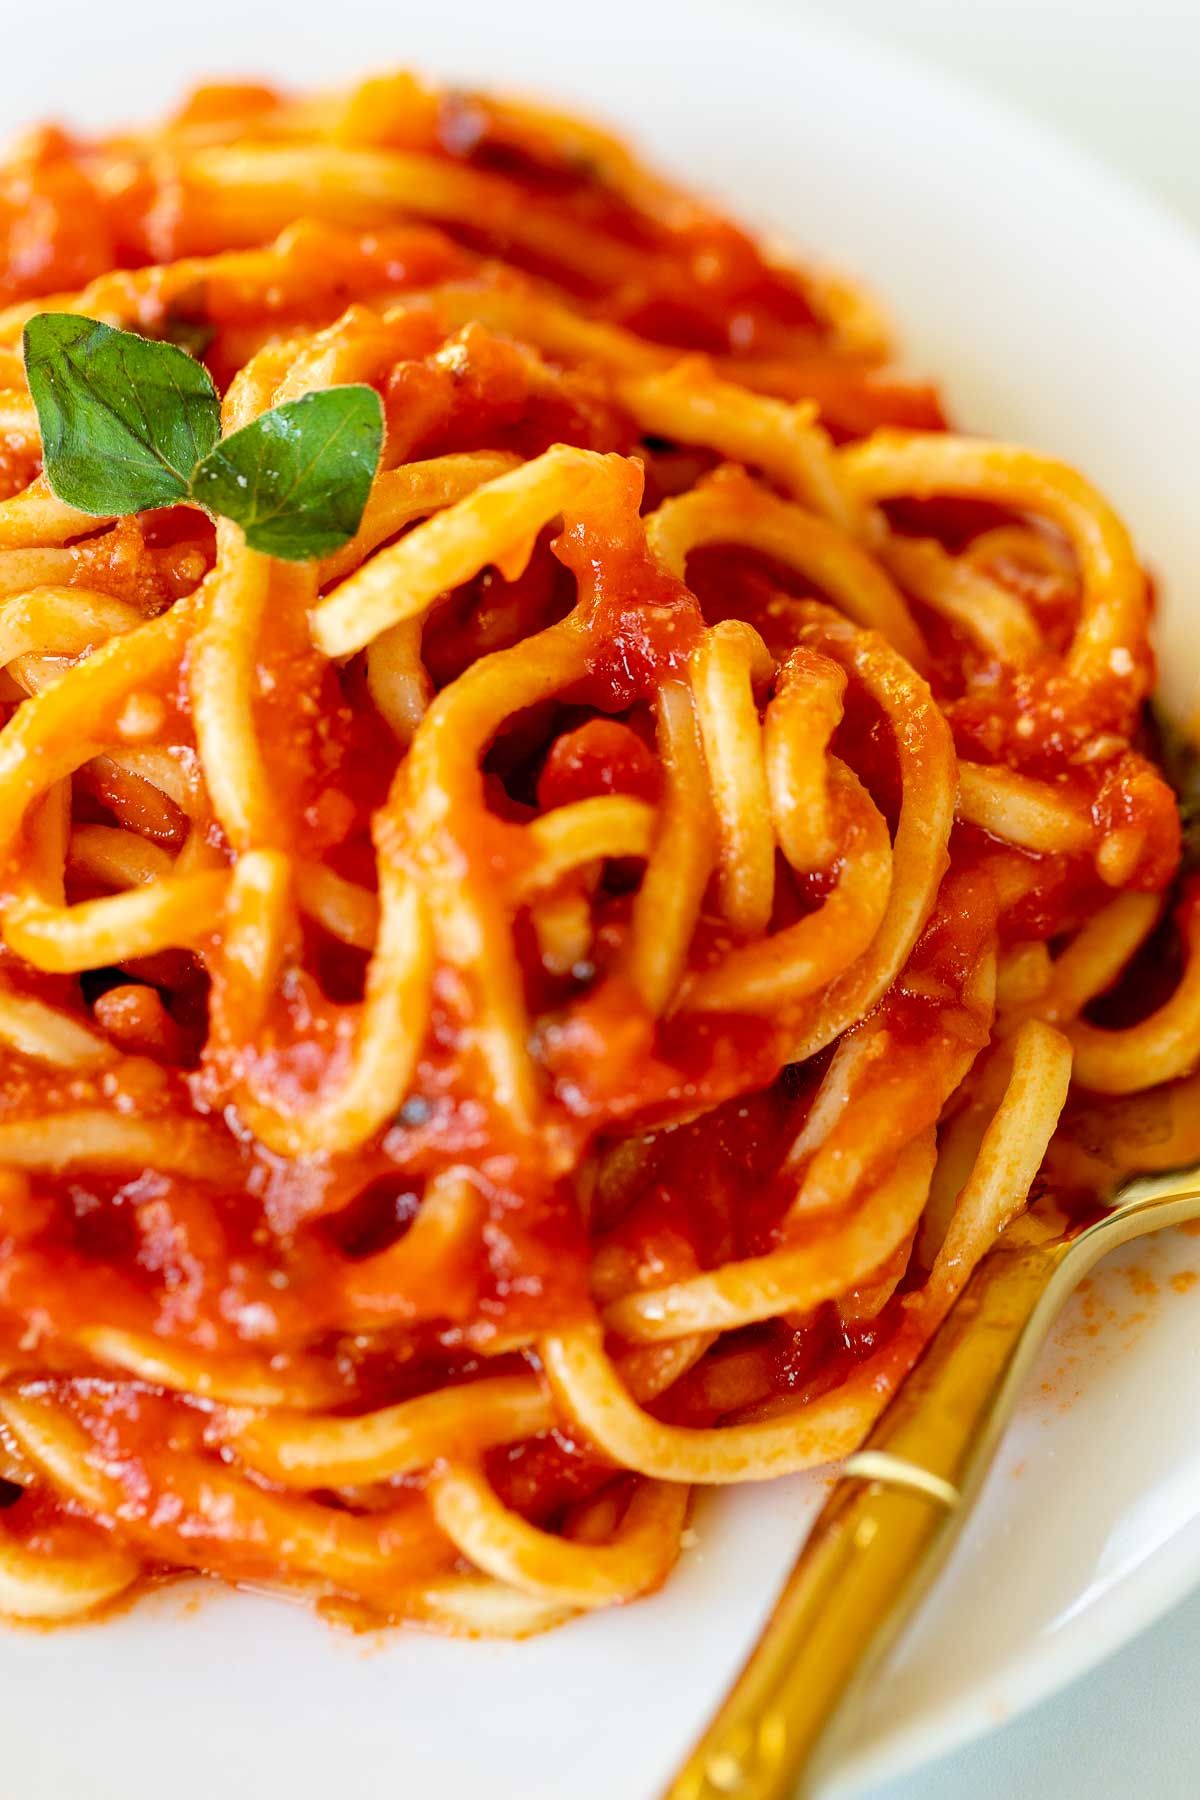 Spaghetti on a white plate, tossed in San Marzano tomato sauce, with a gold fork to the side.